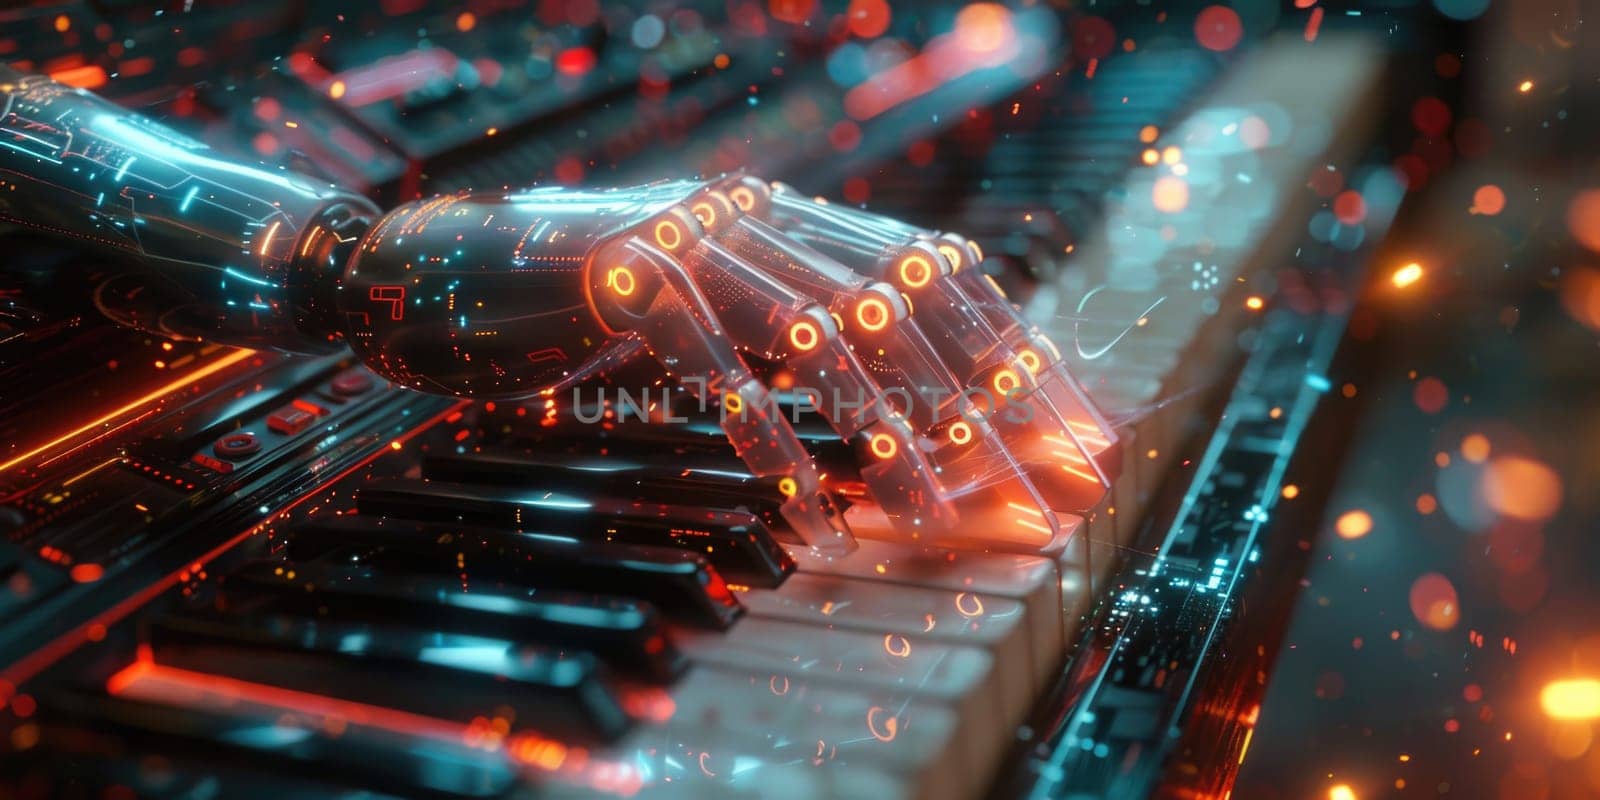 Glowing Futuristic Keyboard With Lights by but_photo